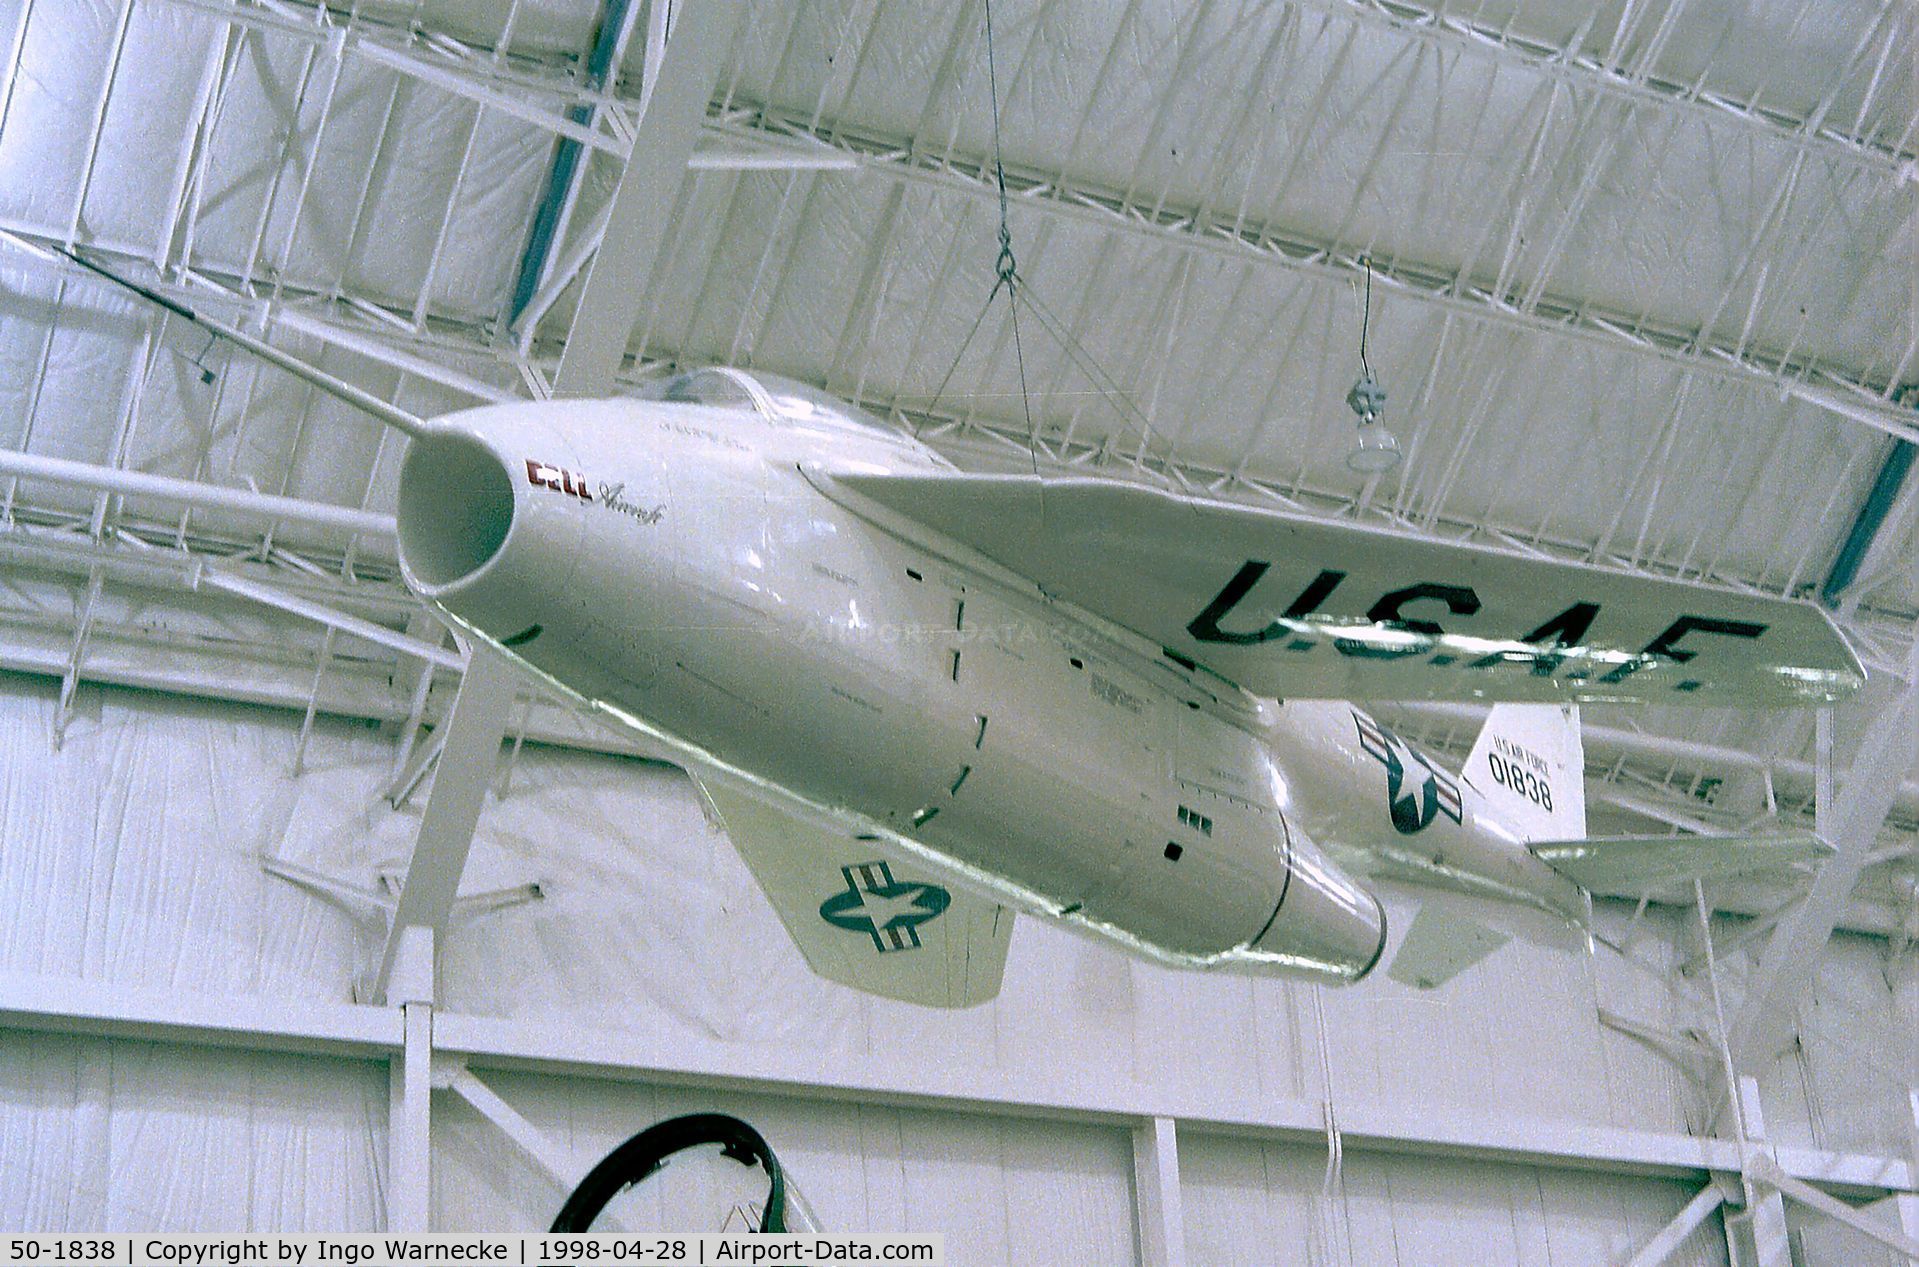 50-1838, 1950 Bell X-5 C/N Not found 50-1838, Bell X-5 at the USAF Museum, Dayton OH